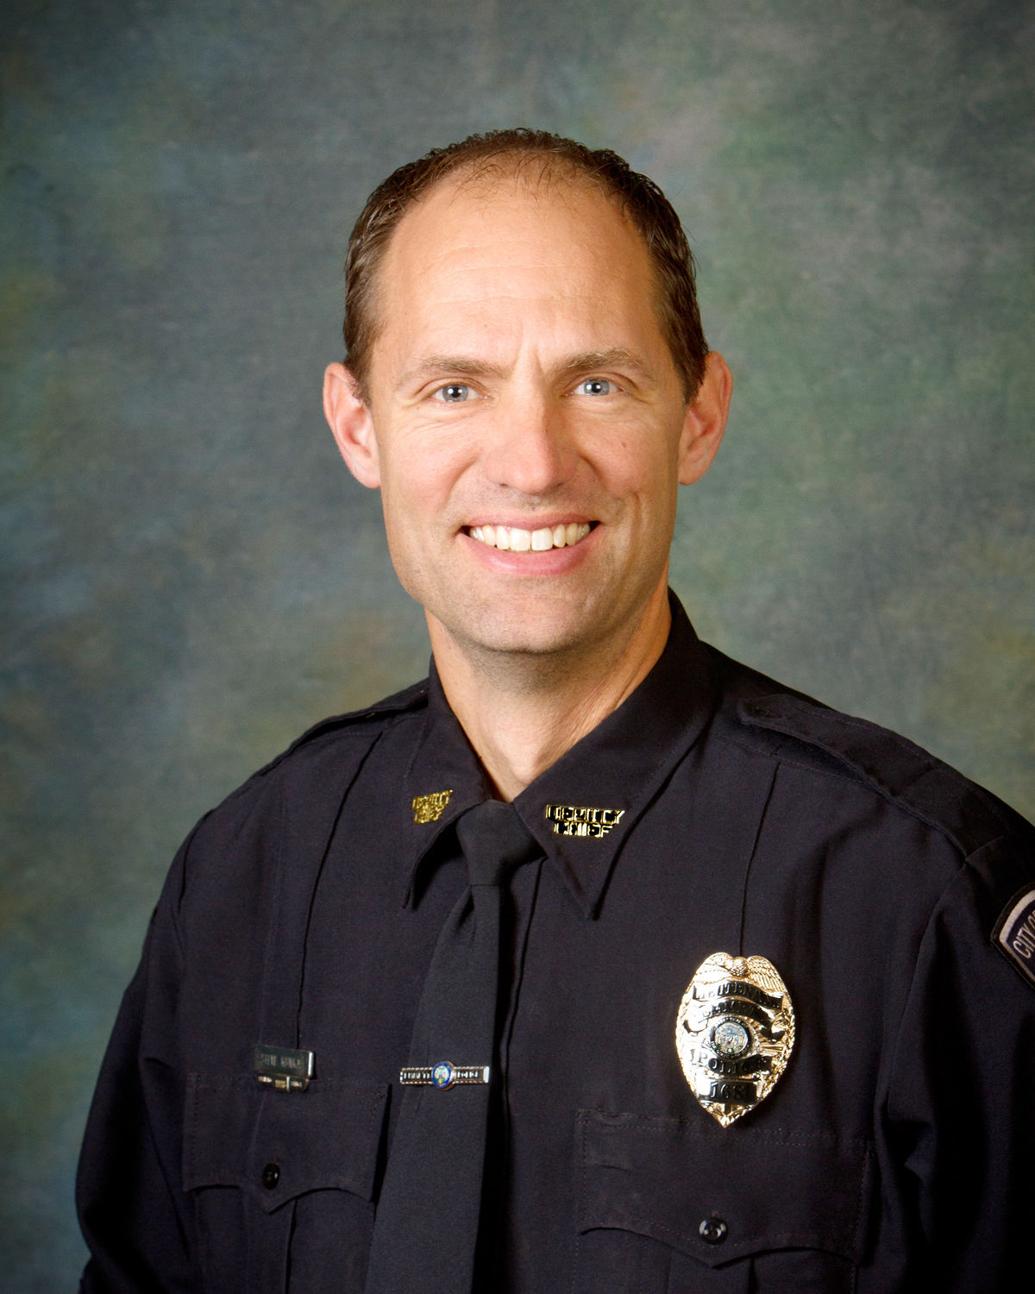 Emmett Police Chief selected by FBI for inaugural course | Local News ...